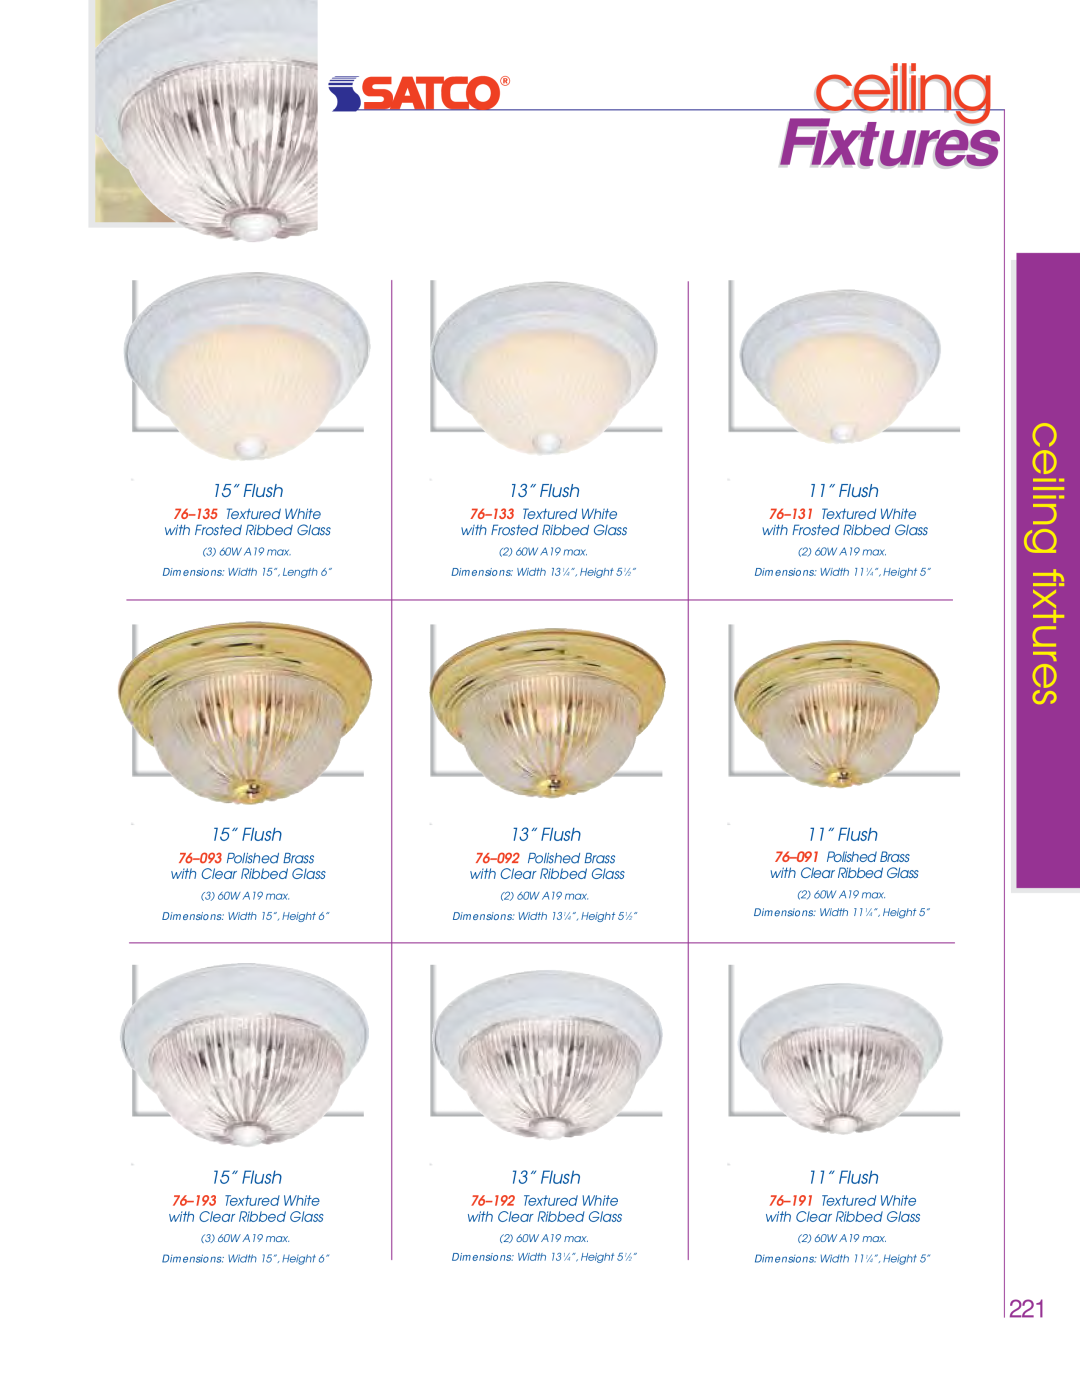 Satco Products 76-444, 76-693 with Clear Ribbed Glass, Fixtures, ceiling fixtures, 15” Flush, 13” Flush, 11” Flush 